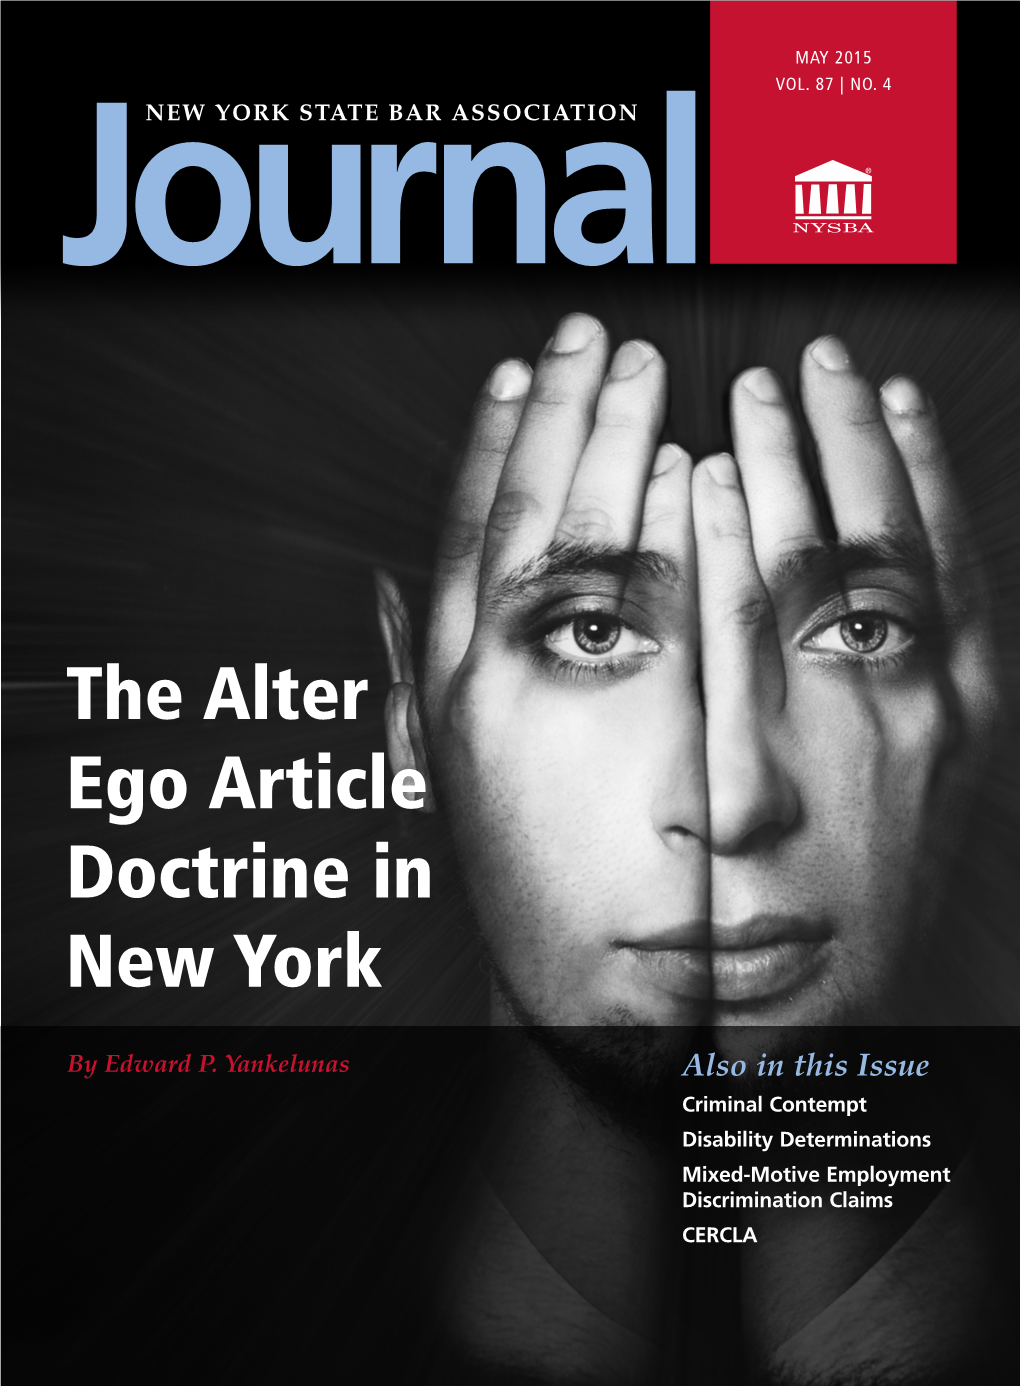 The Alter Ego Article Doctrine in New York